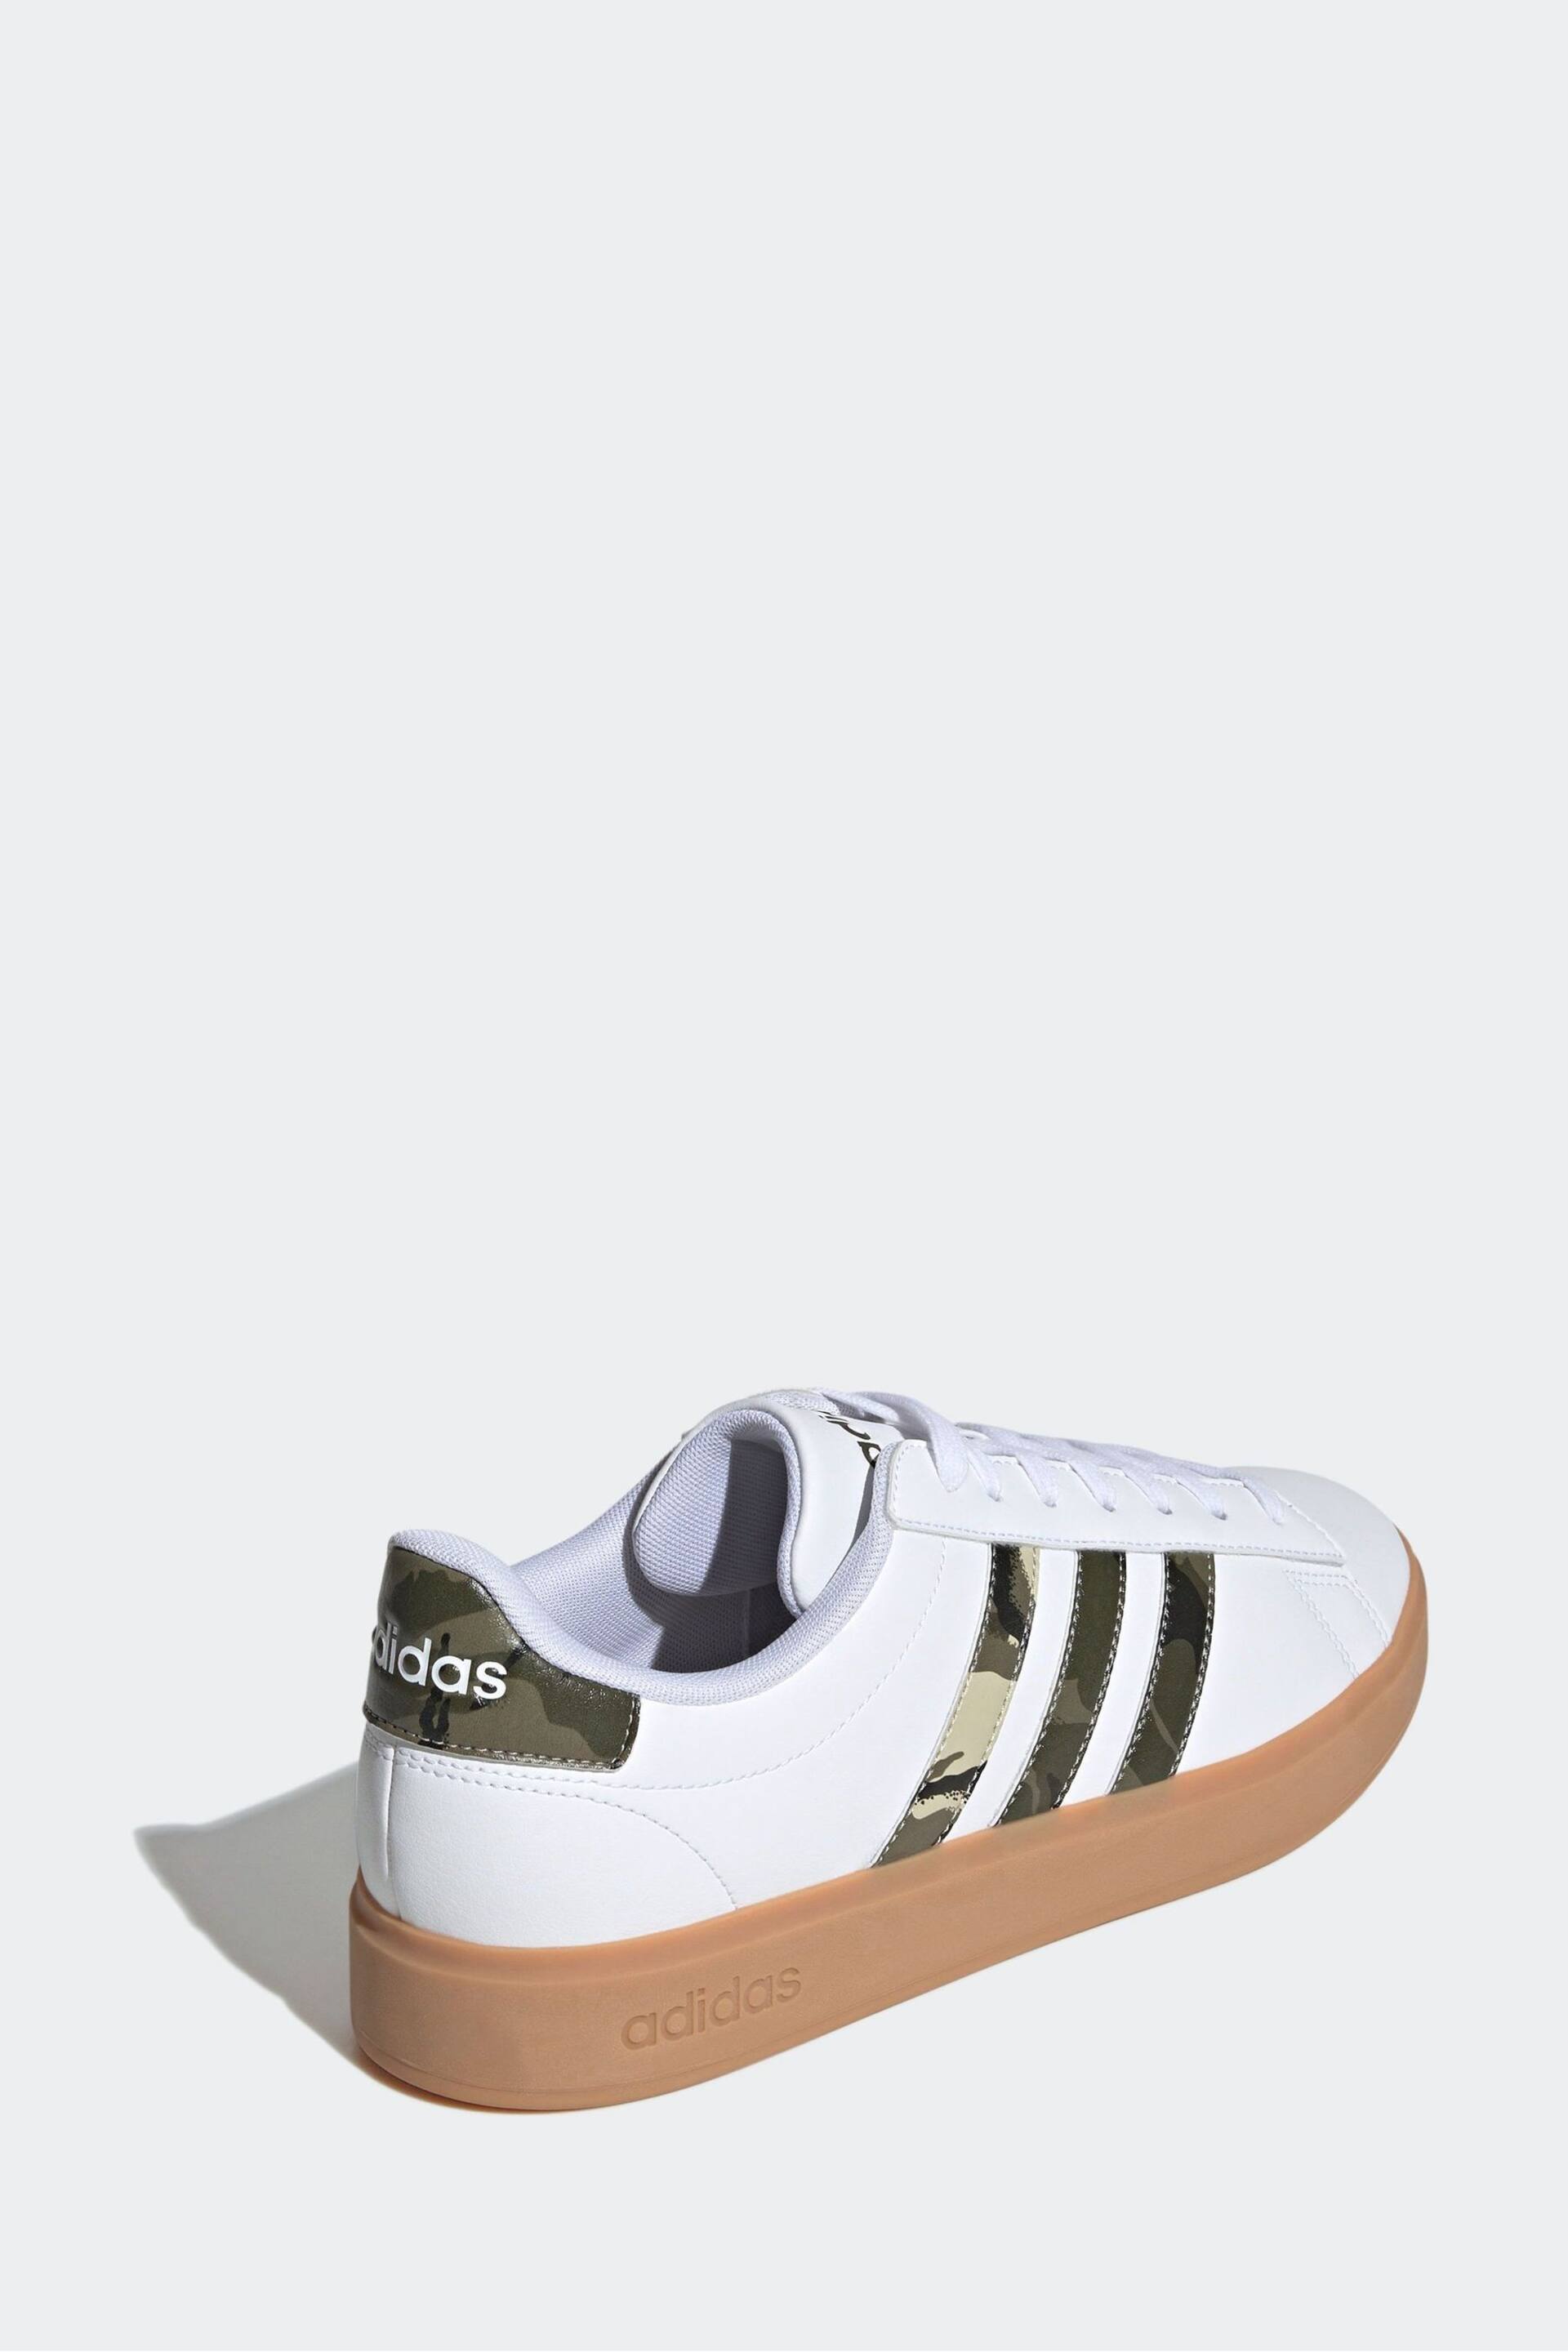 adidas Off White Sportswear Grand Court 2.0 Trainers - Image 2 of 9